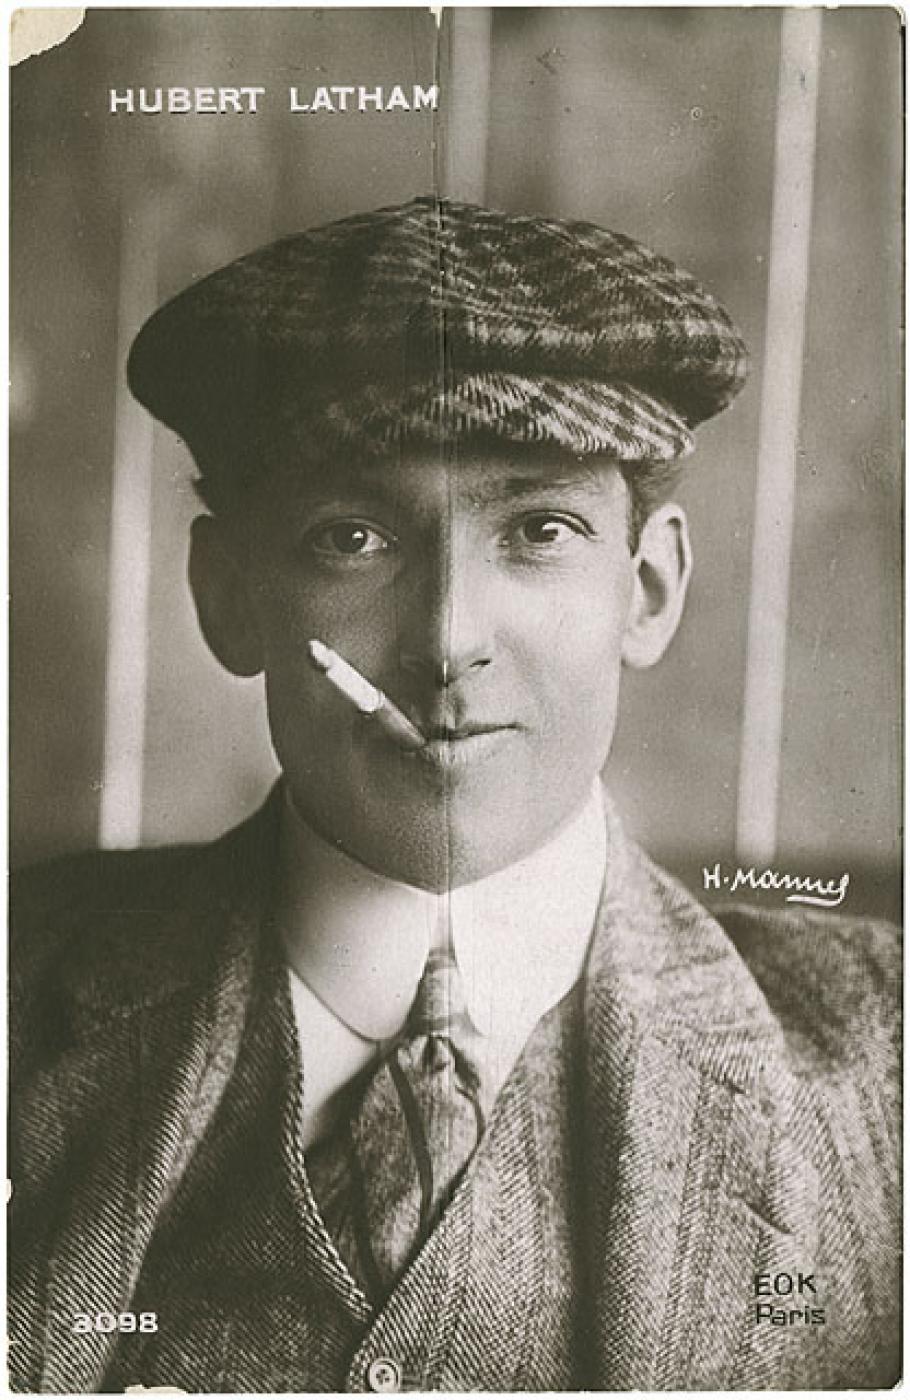 Black and white portrait of Latham with a cigarette in his mouth and a slight smile.